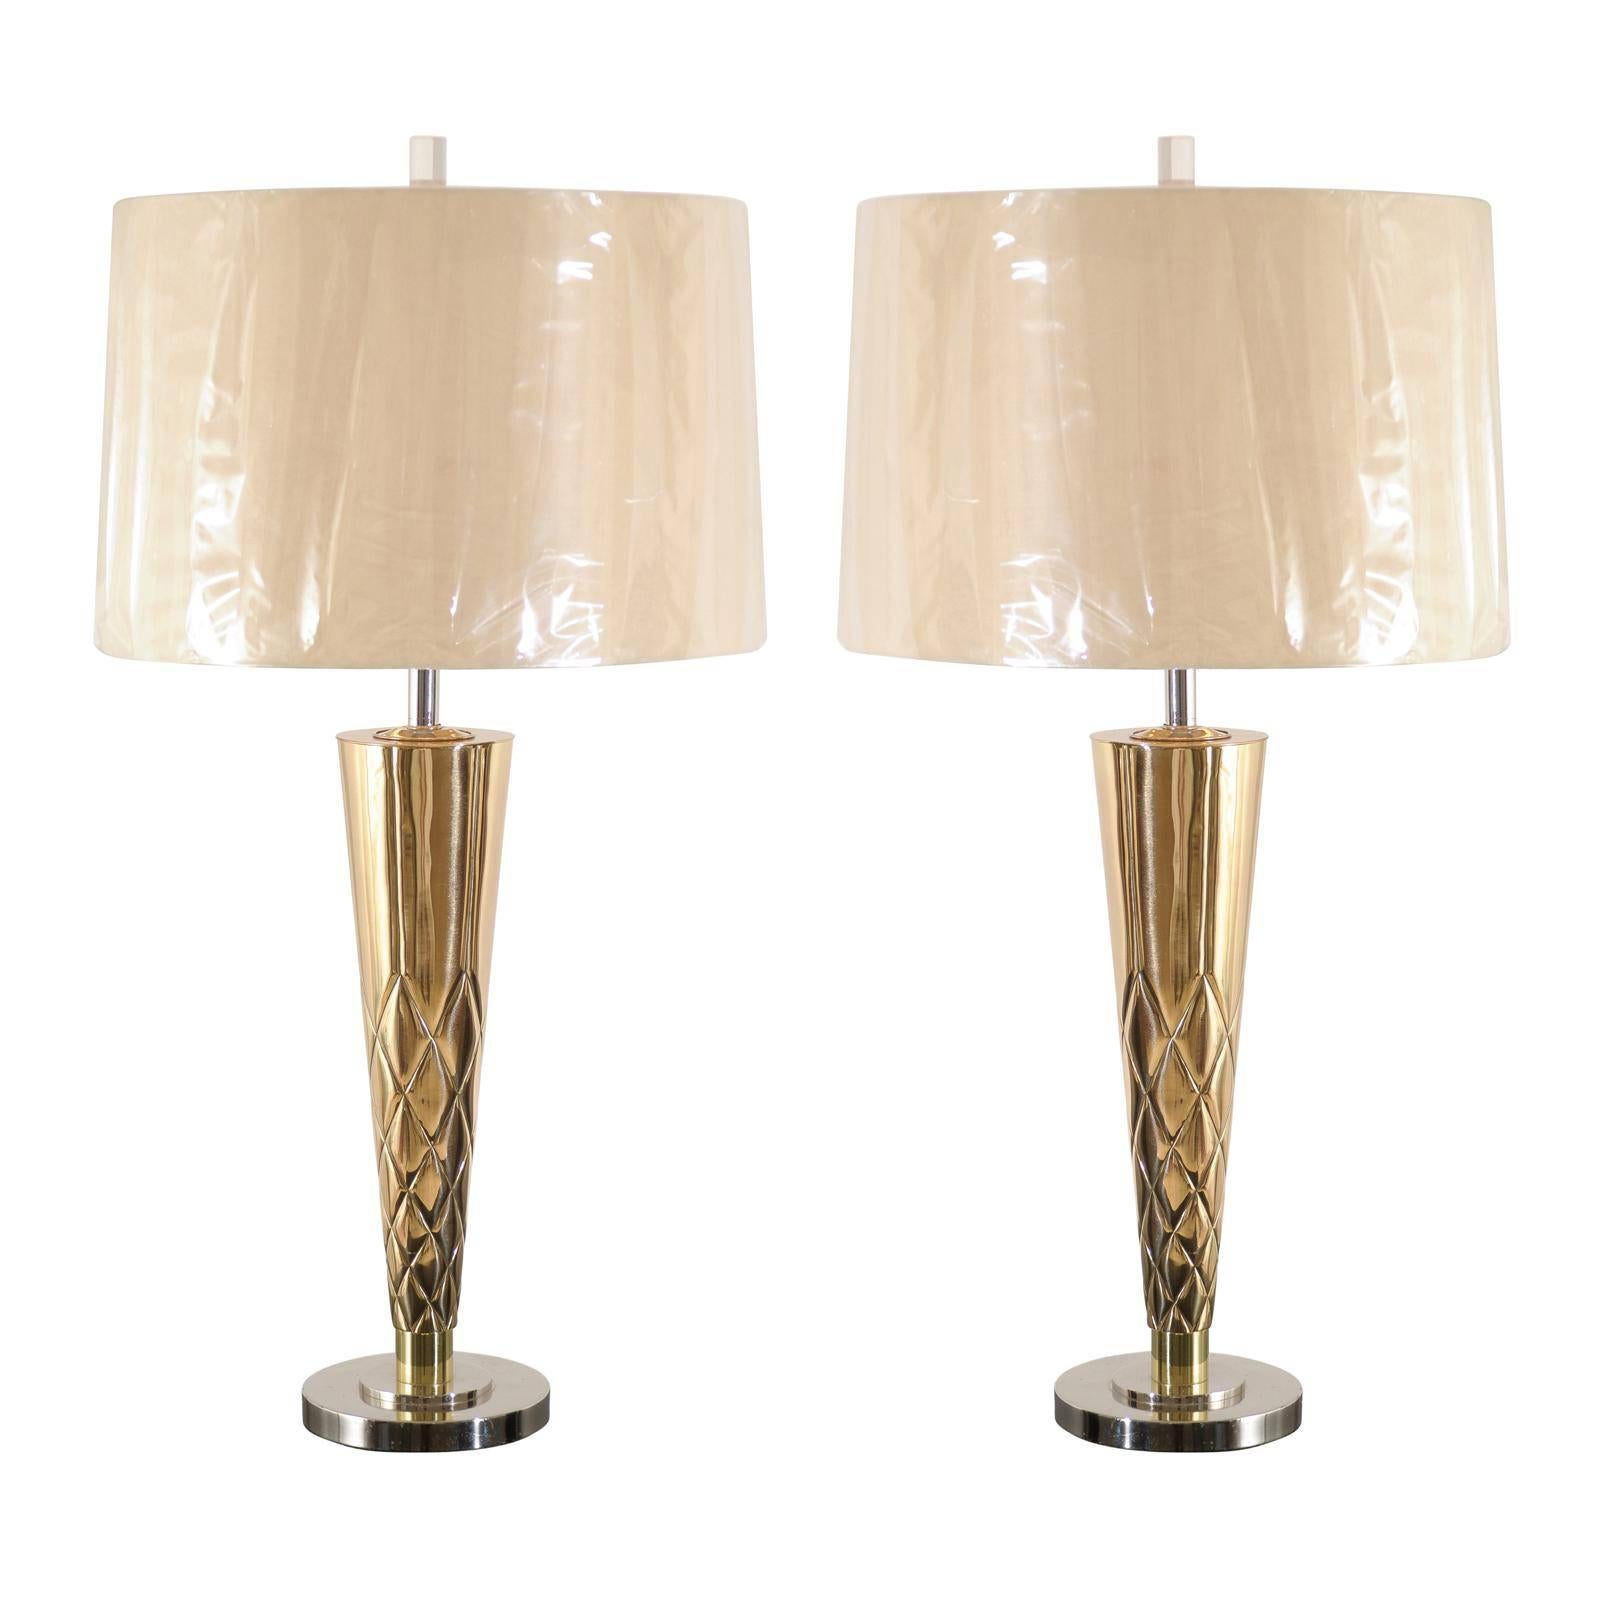 Exquisite Pair of Etched Tornado Lamps in Brass and Nickel For Sale